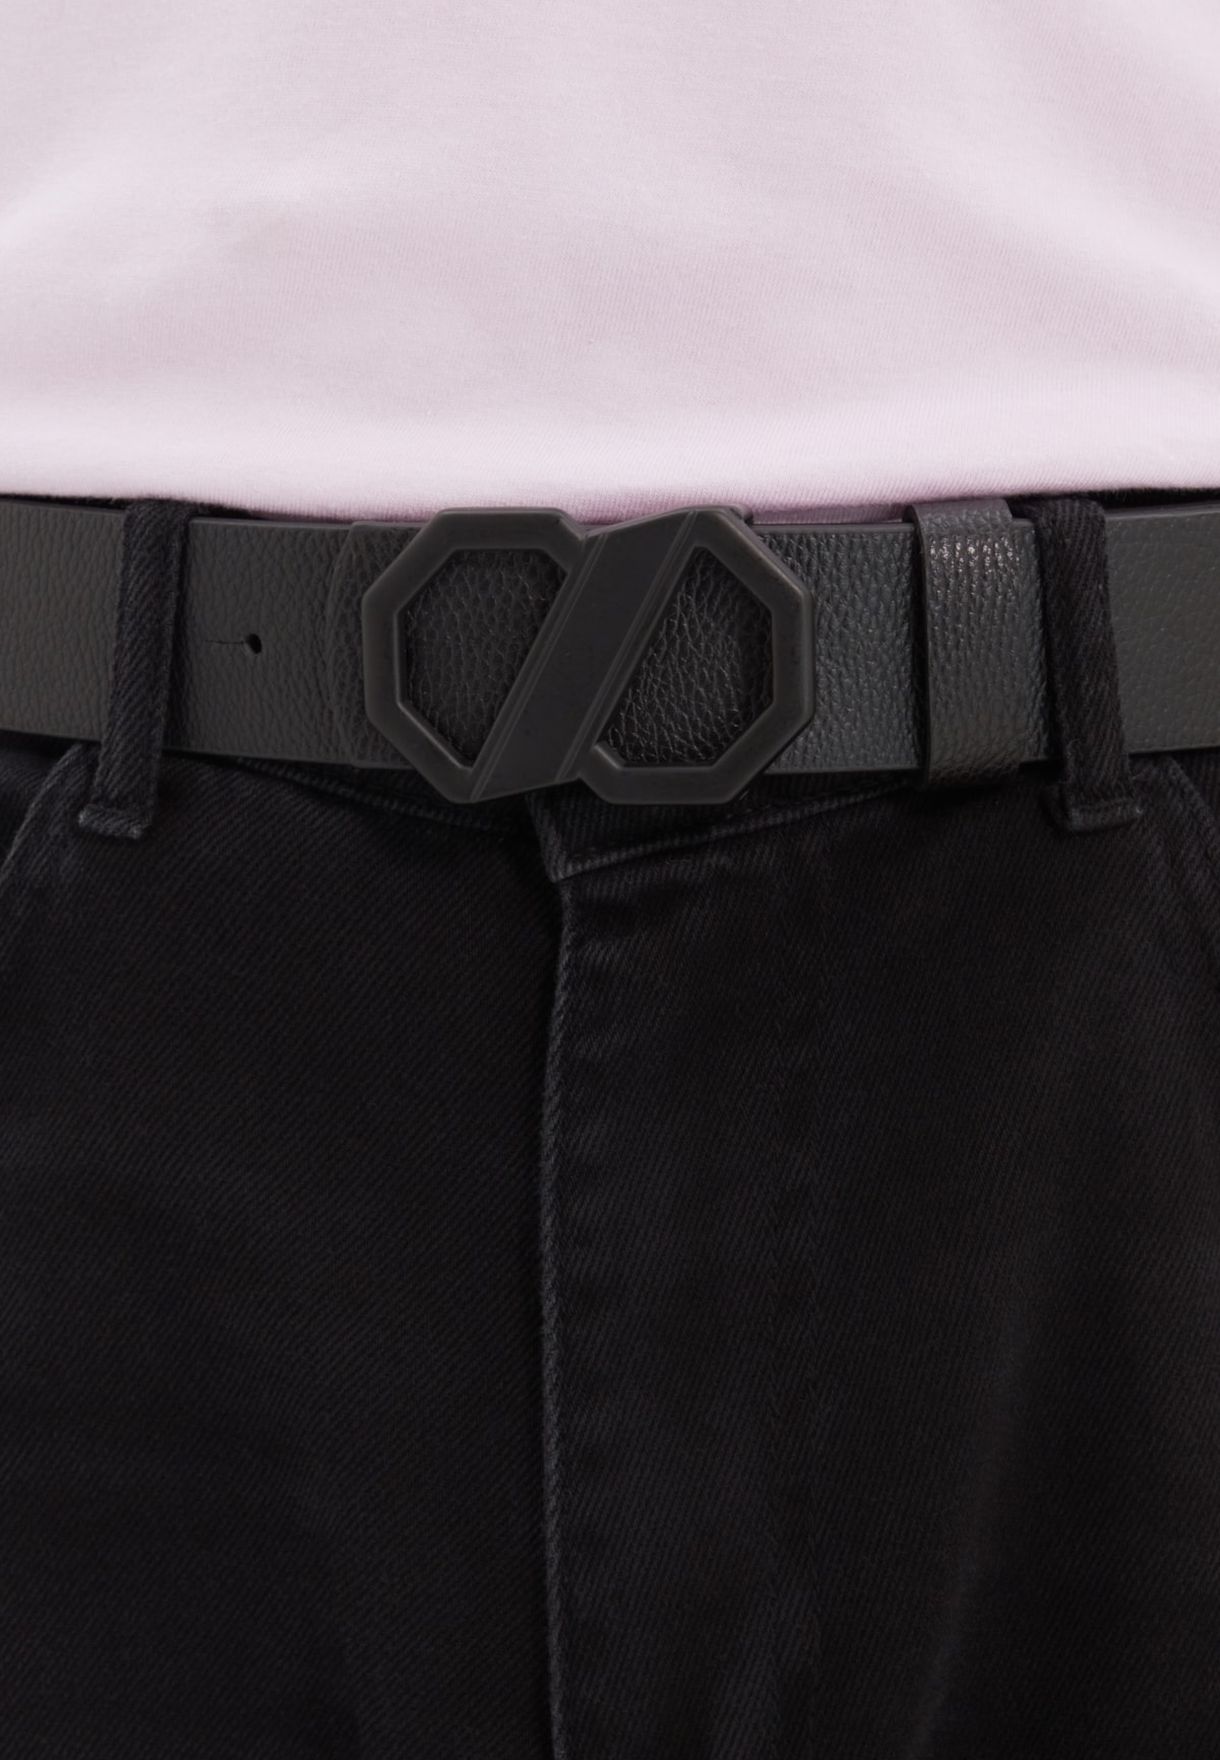 Buckled Allocated Hole Belt